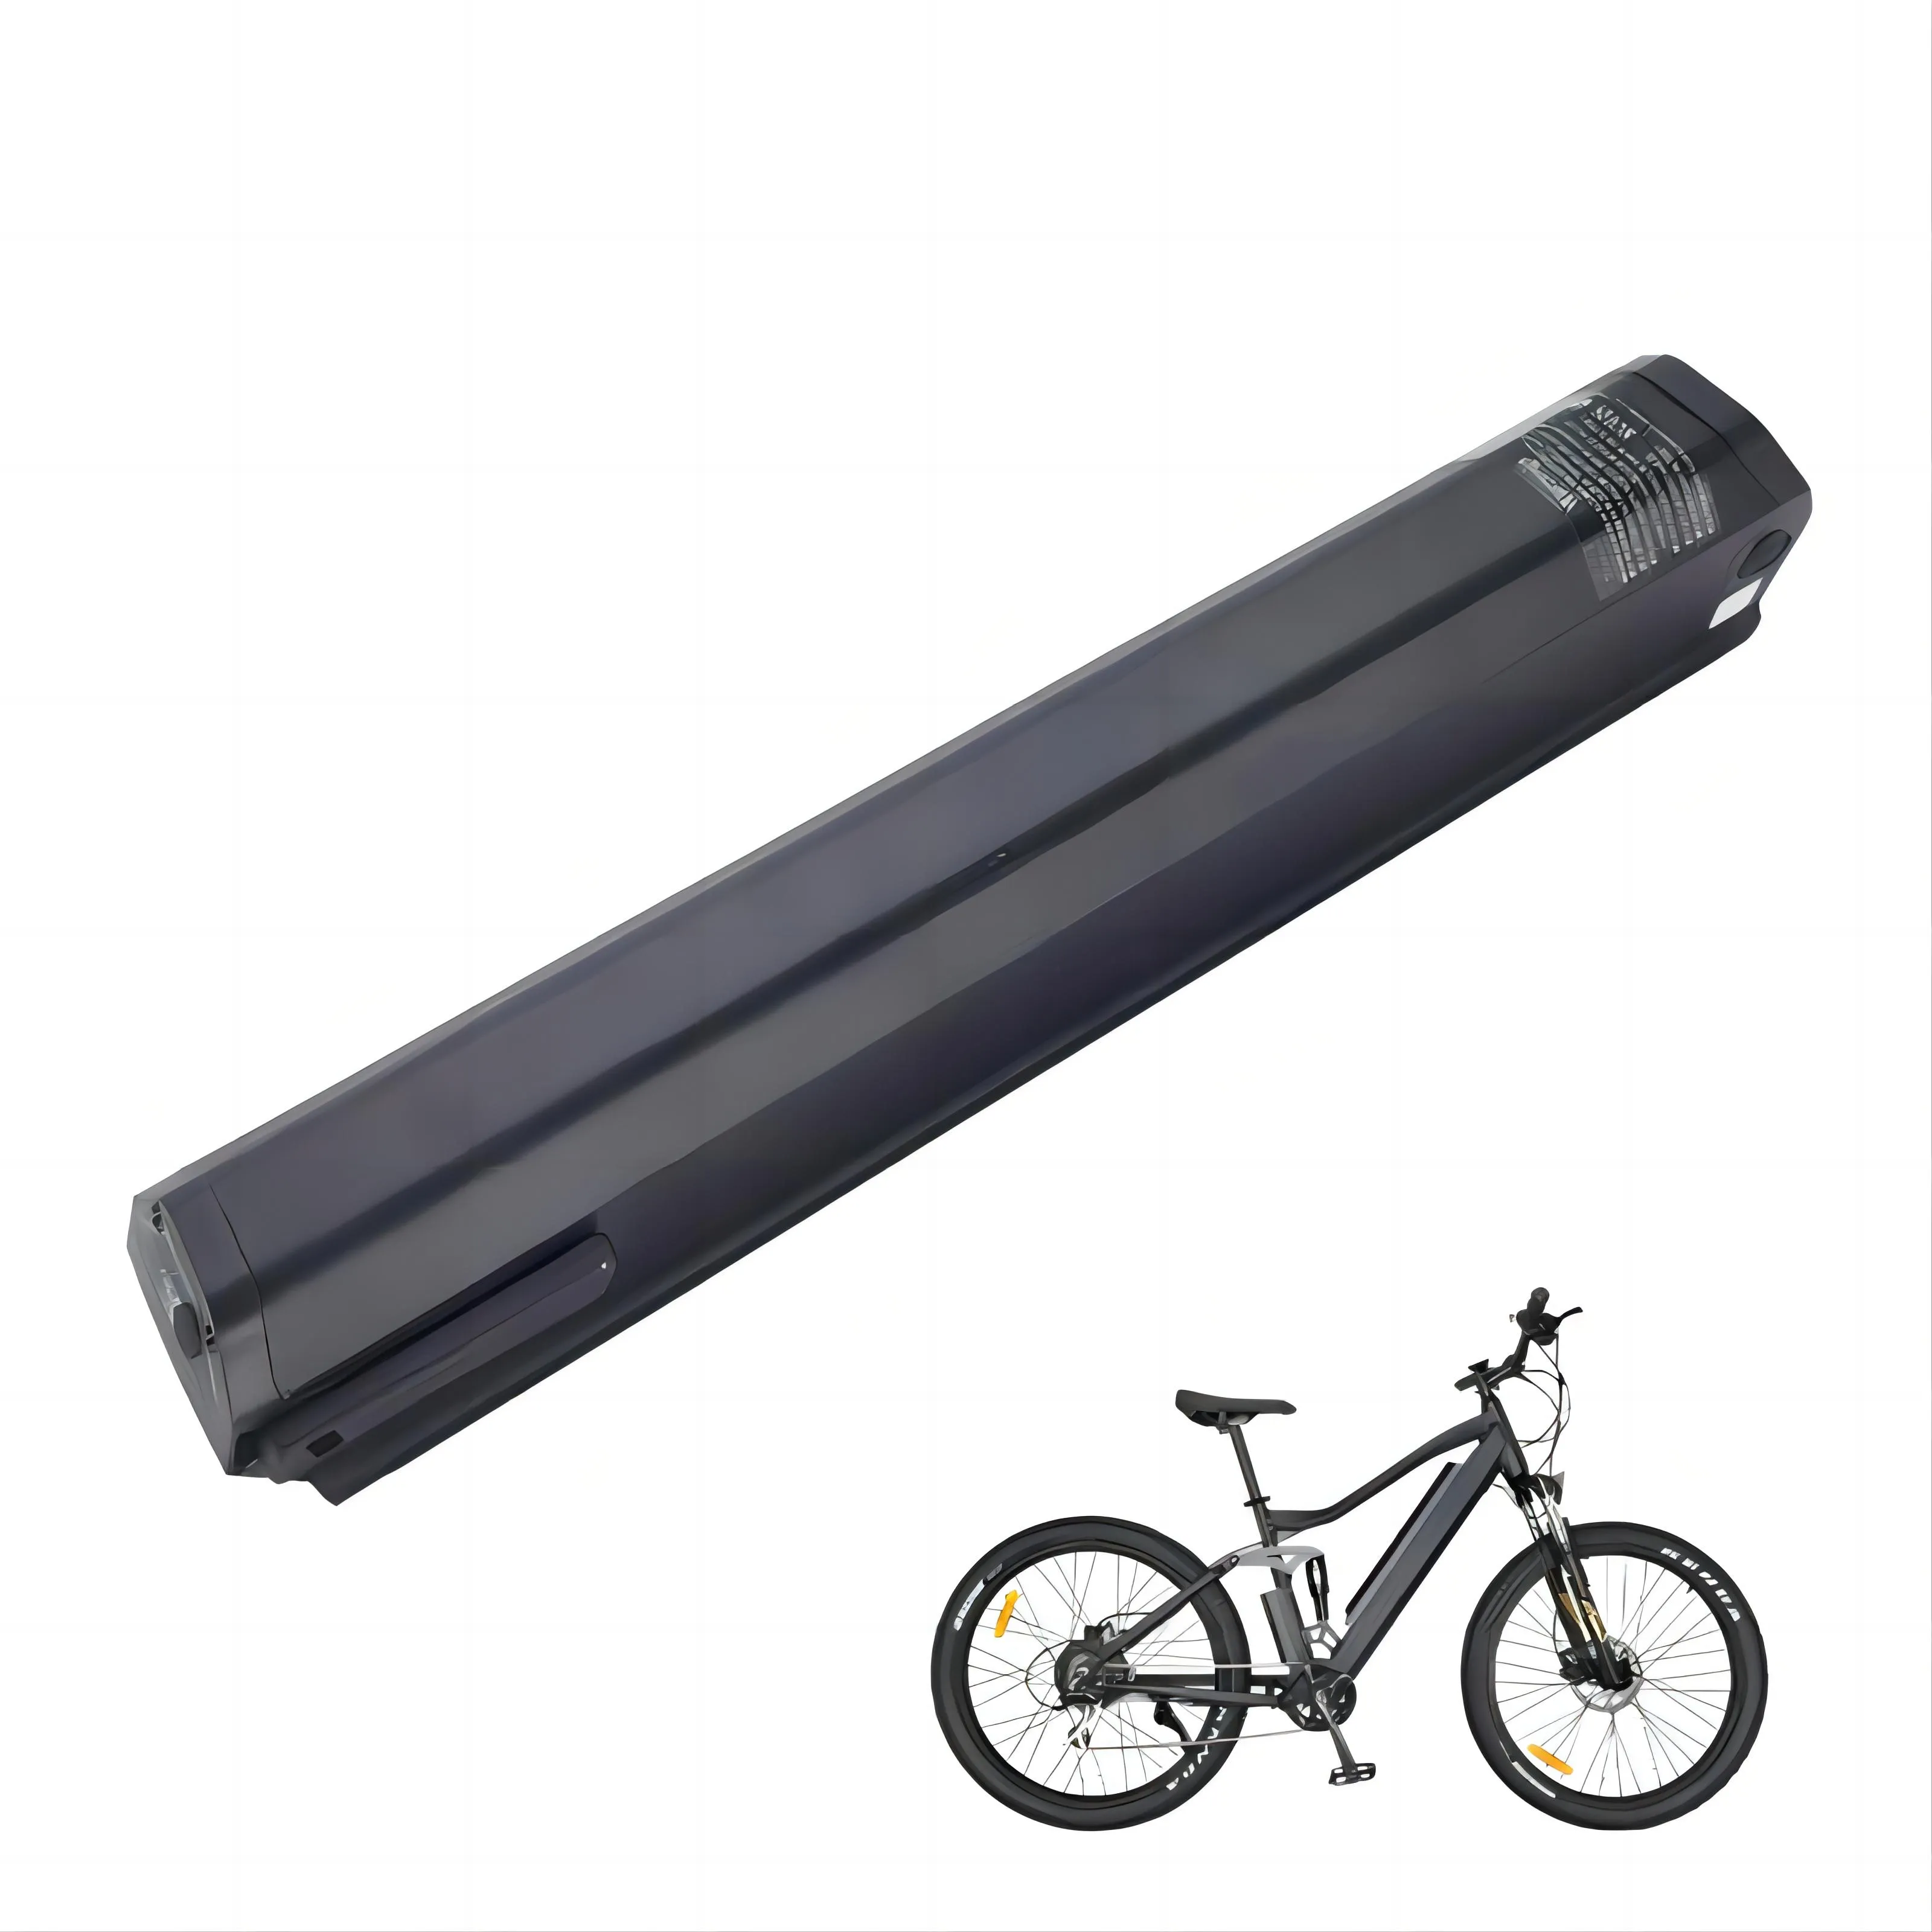 RECENTION DORADO PROANTY BATTERY BATERY CITY CITY BICYCLE 36 VOLT LITHIUM BATTE